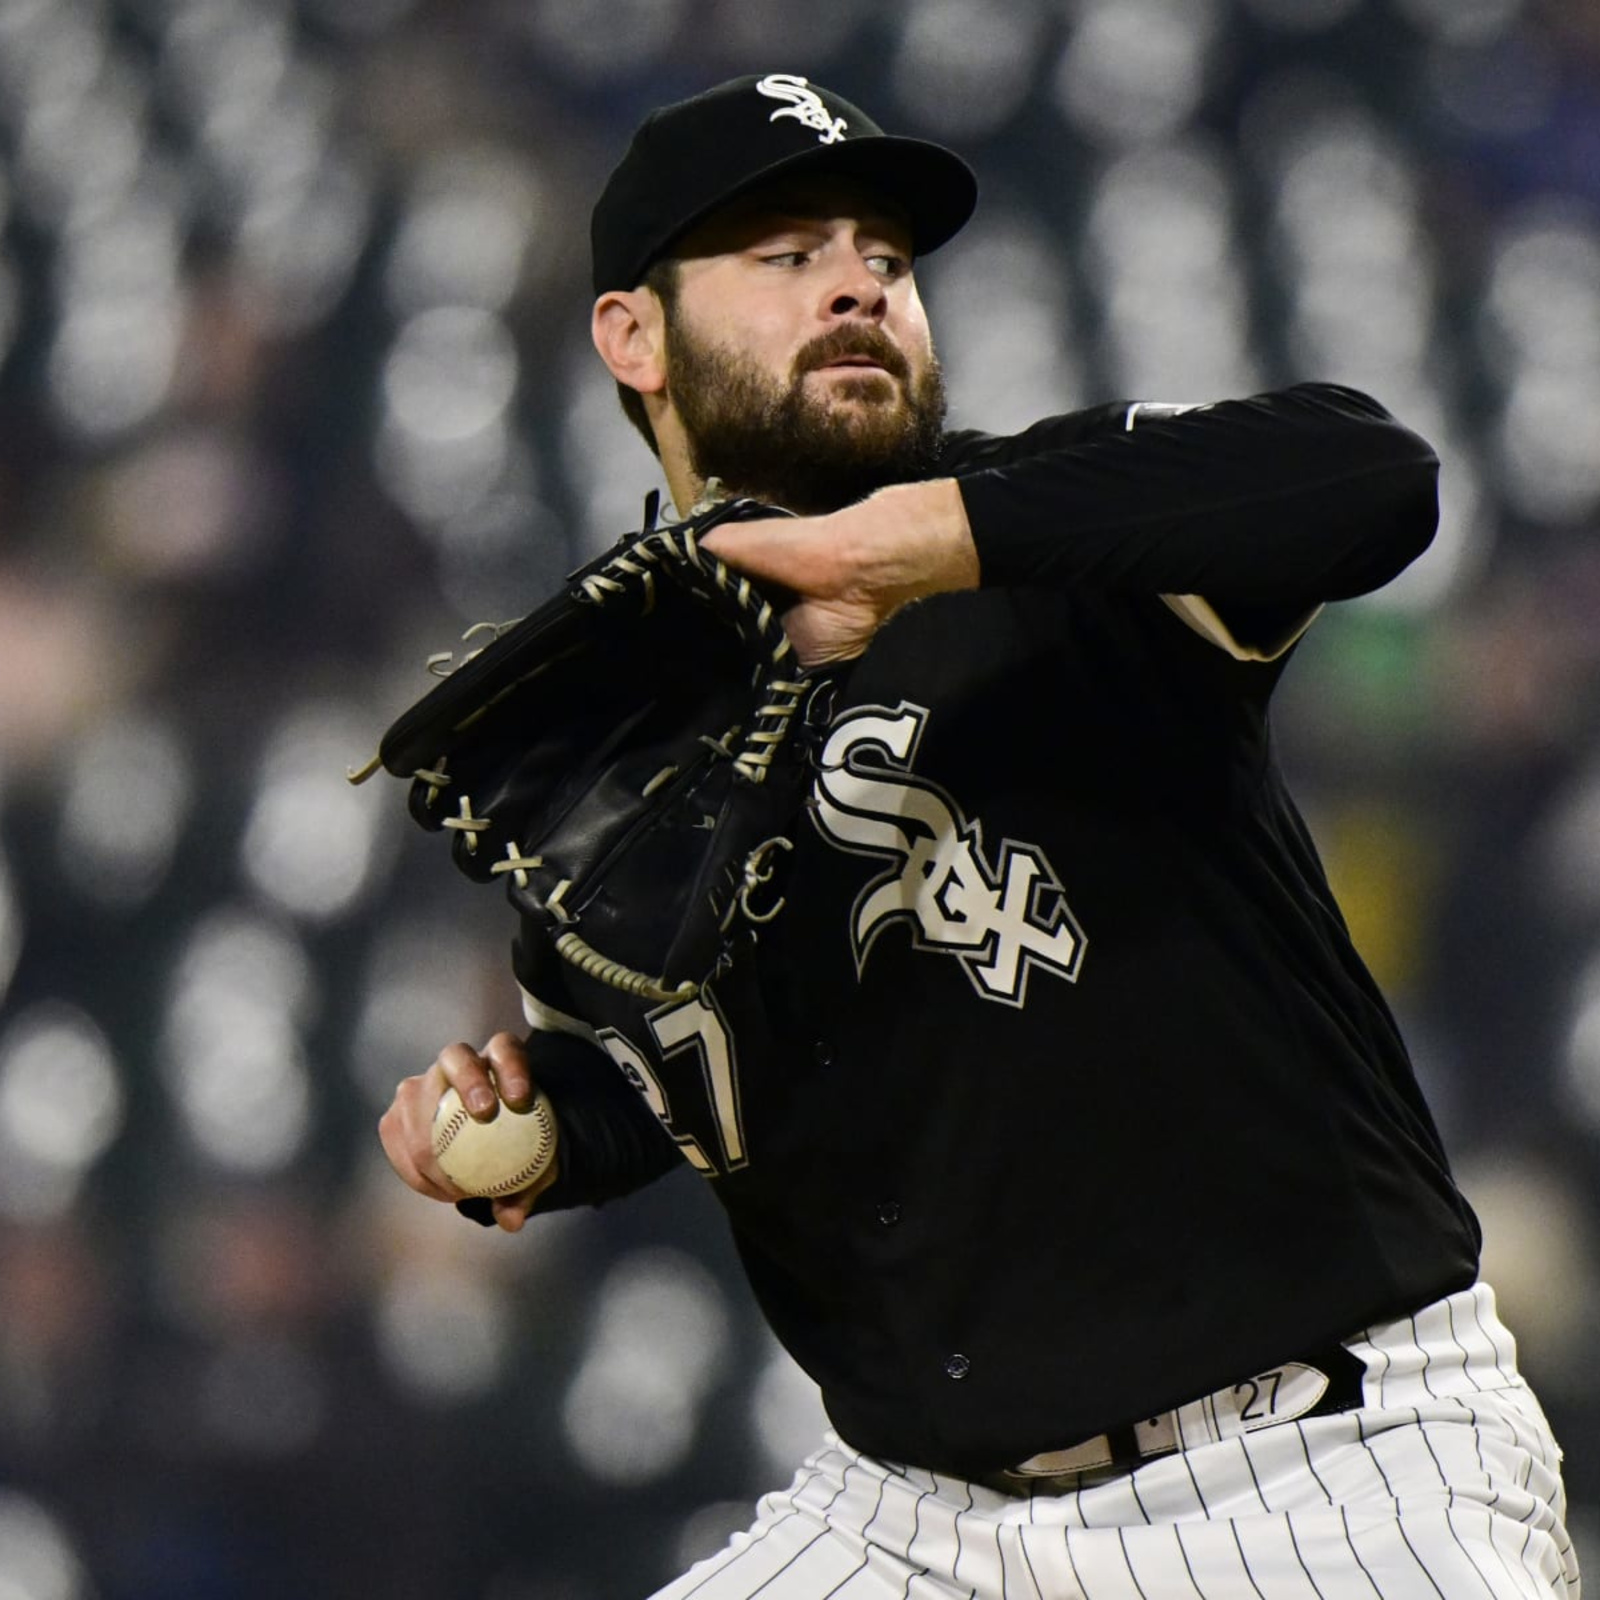 Pitching remains concern for Pirates, White Sox